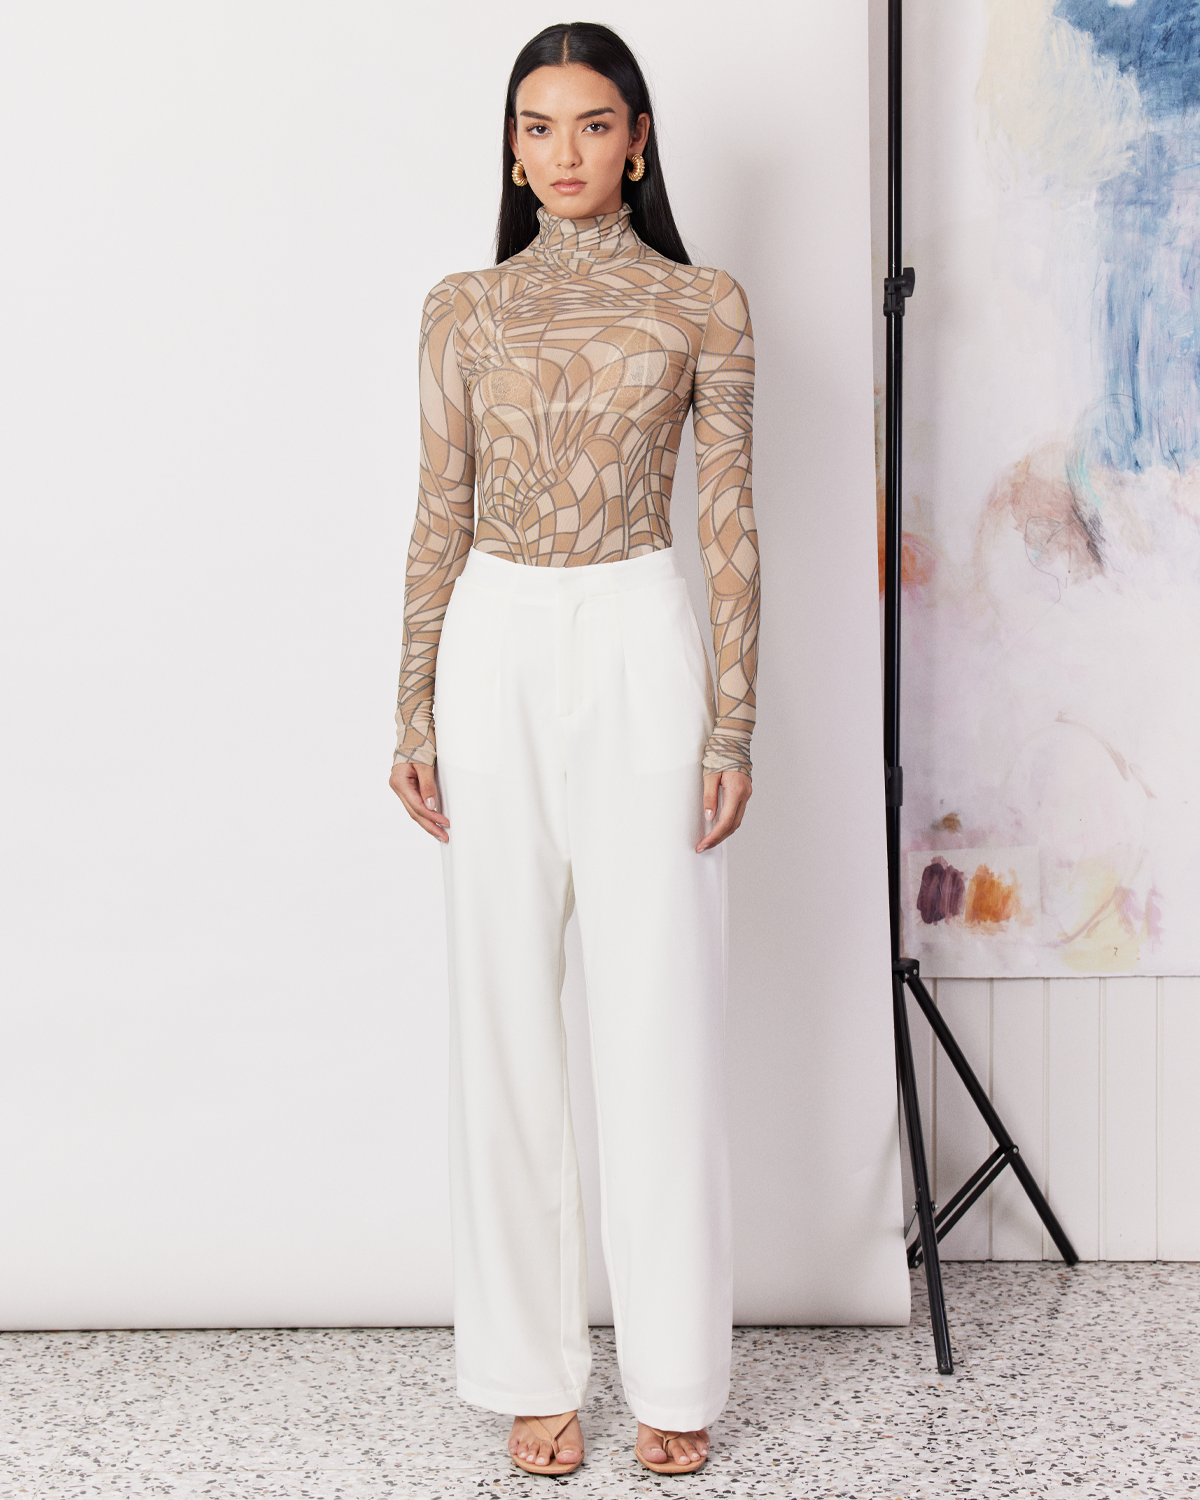 The Tailored Pant are an easy-wearing and versatile cream pant in a relaxed straight leg silhouette. Crafted with a soft wool blend, these pants are fully-lined, featuring a mid-waist rise, a hidden clasp closure, and an elasticated back for ease and comfort. These versatile white tailored pants are the perfect addition to your wardrobe.